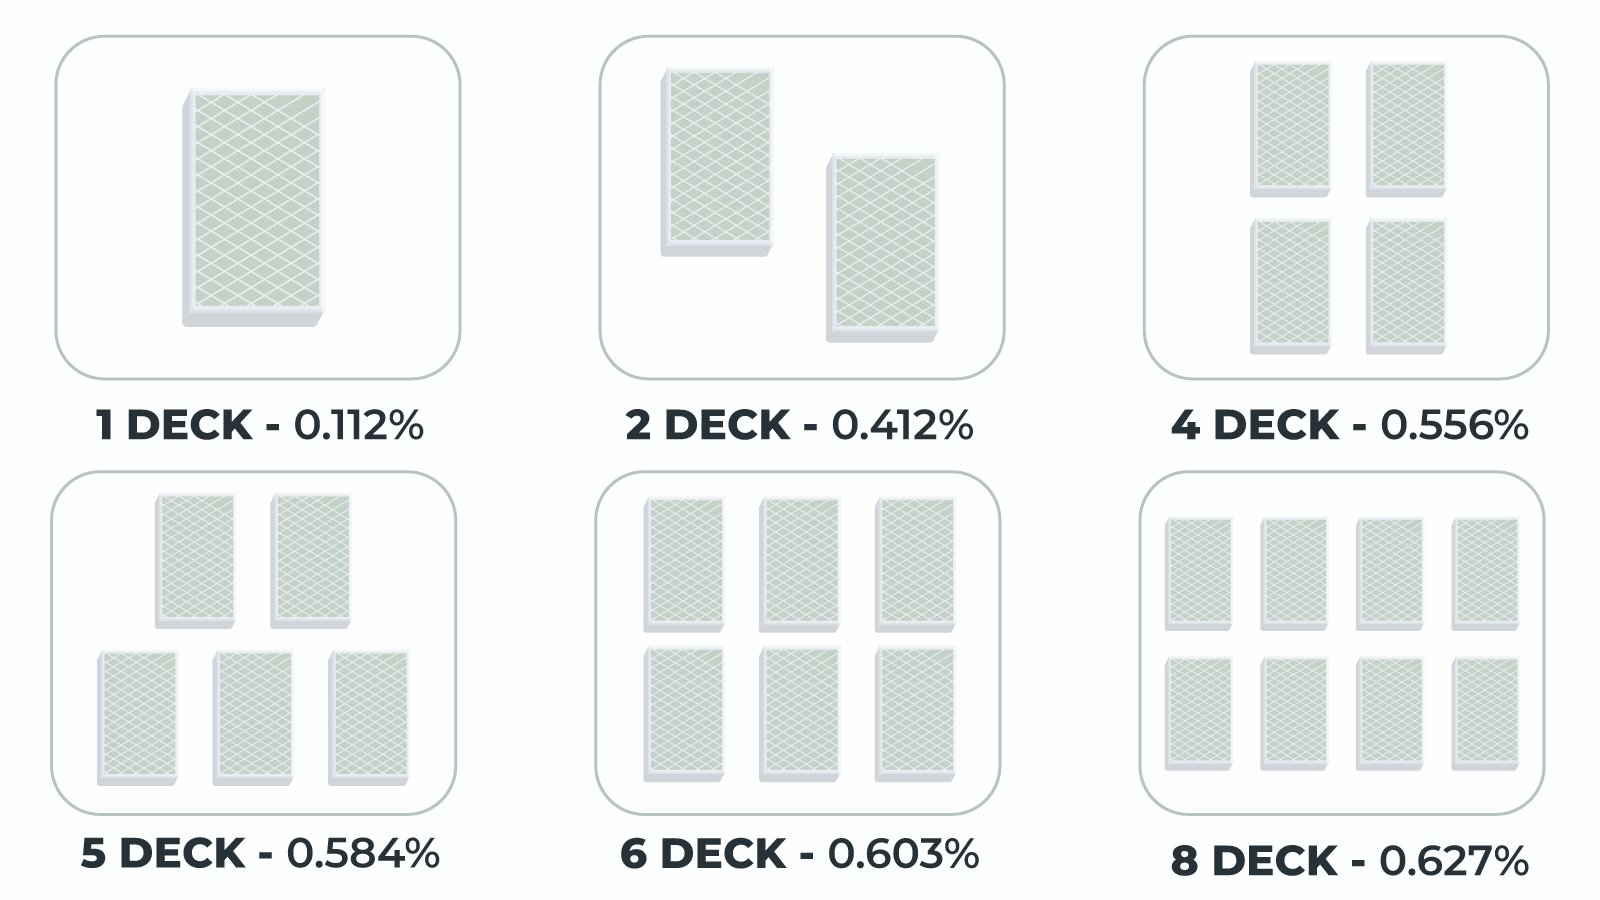 The Blackjack number of decks and the house edge